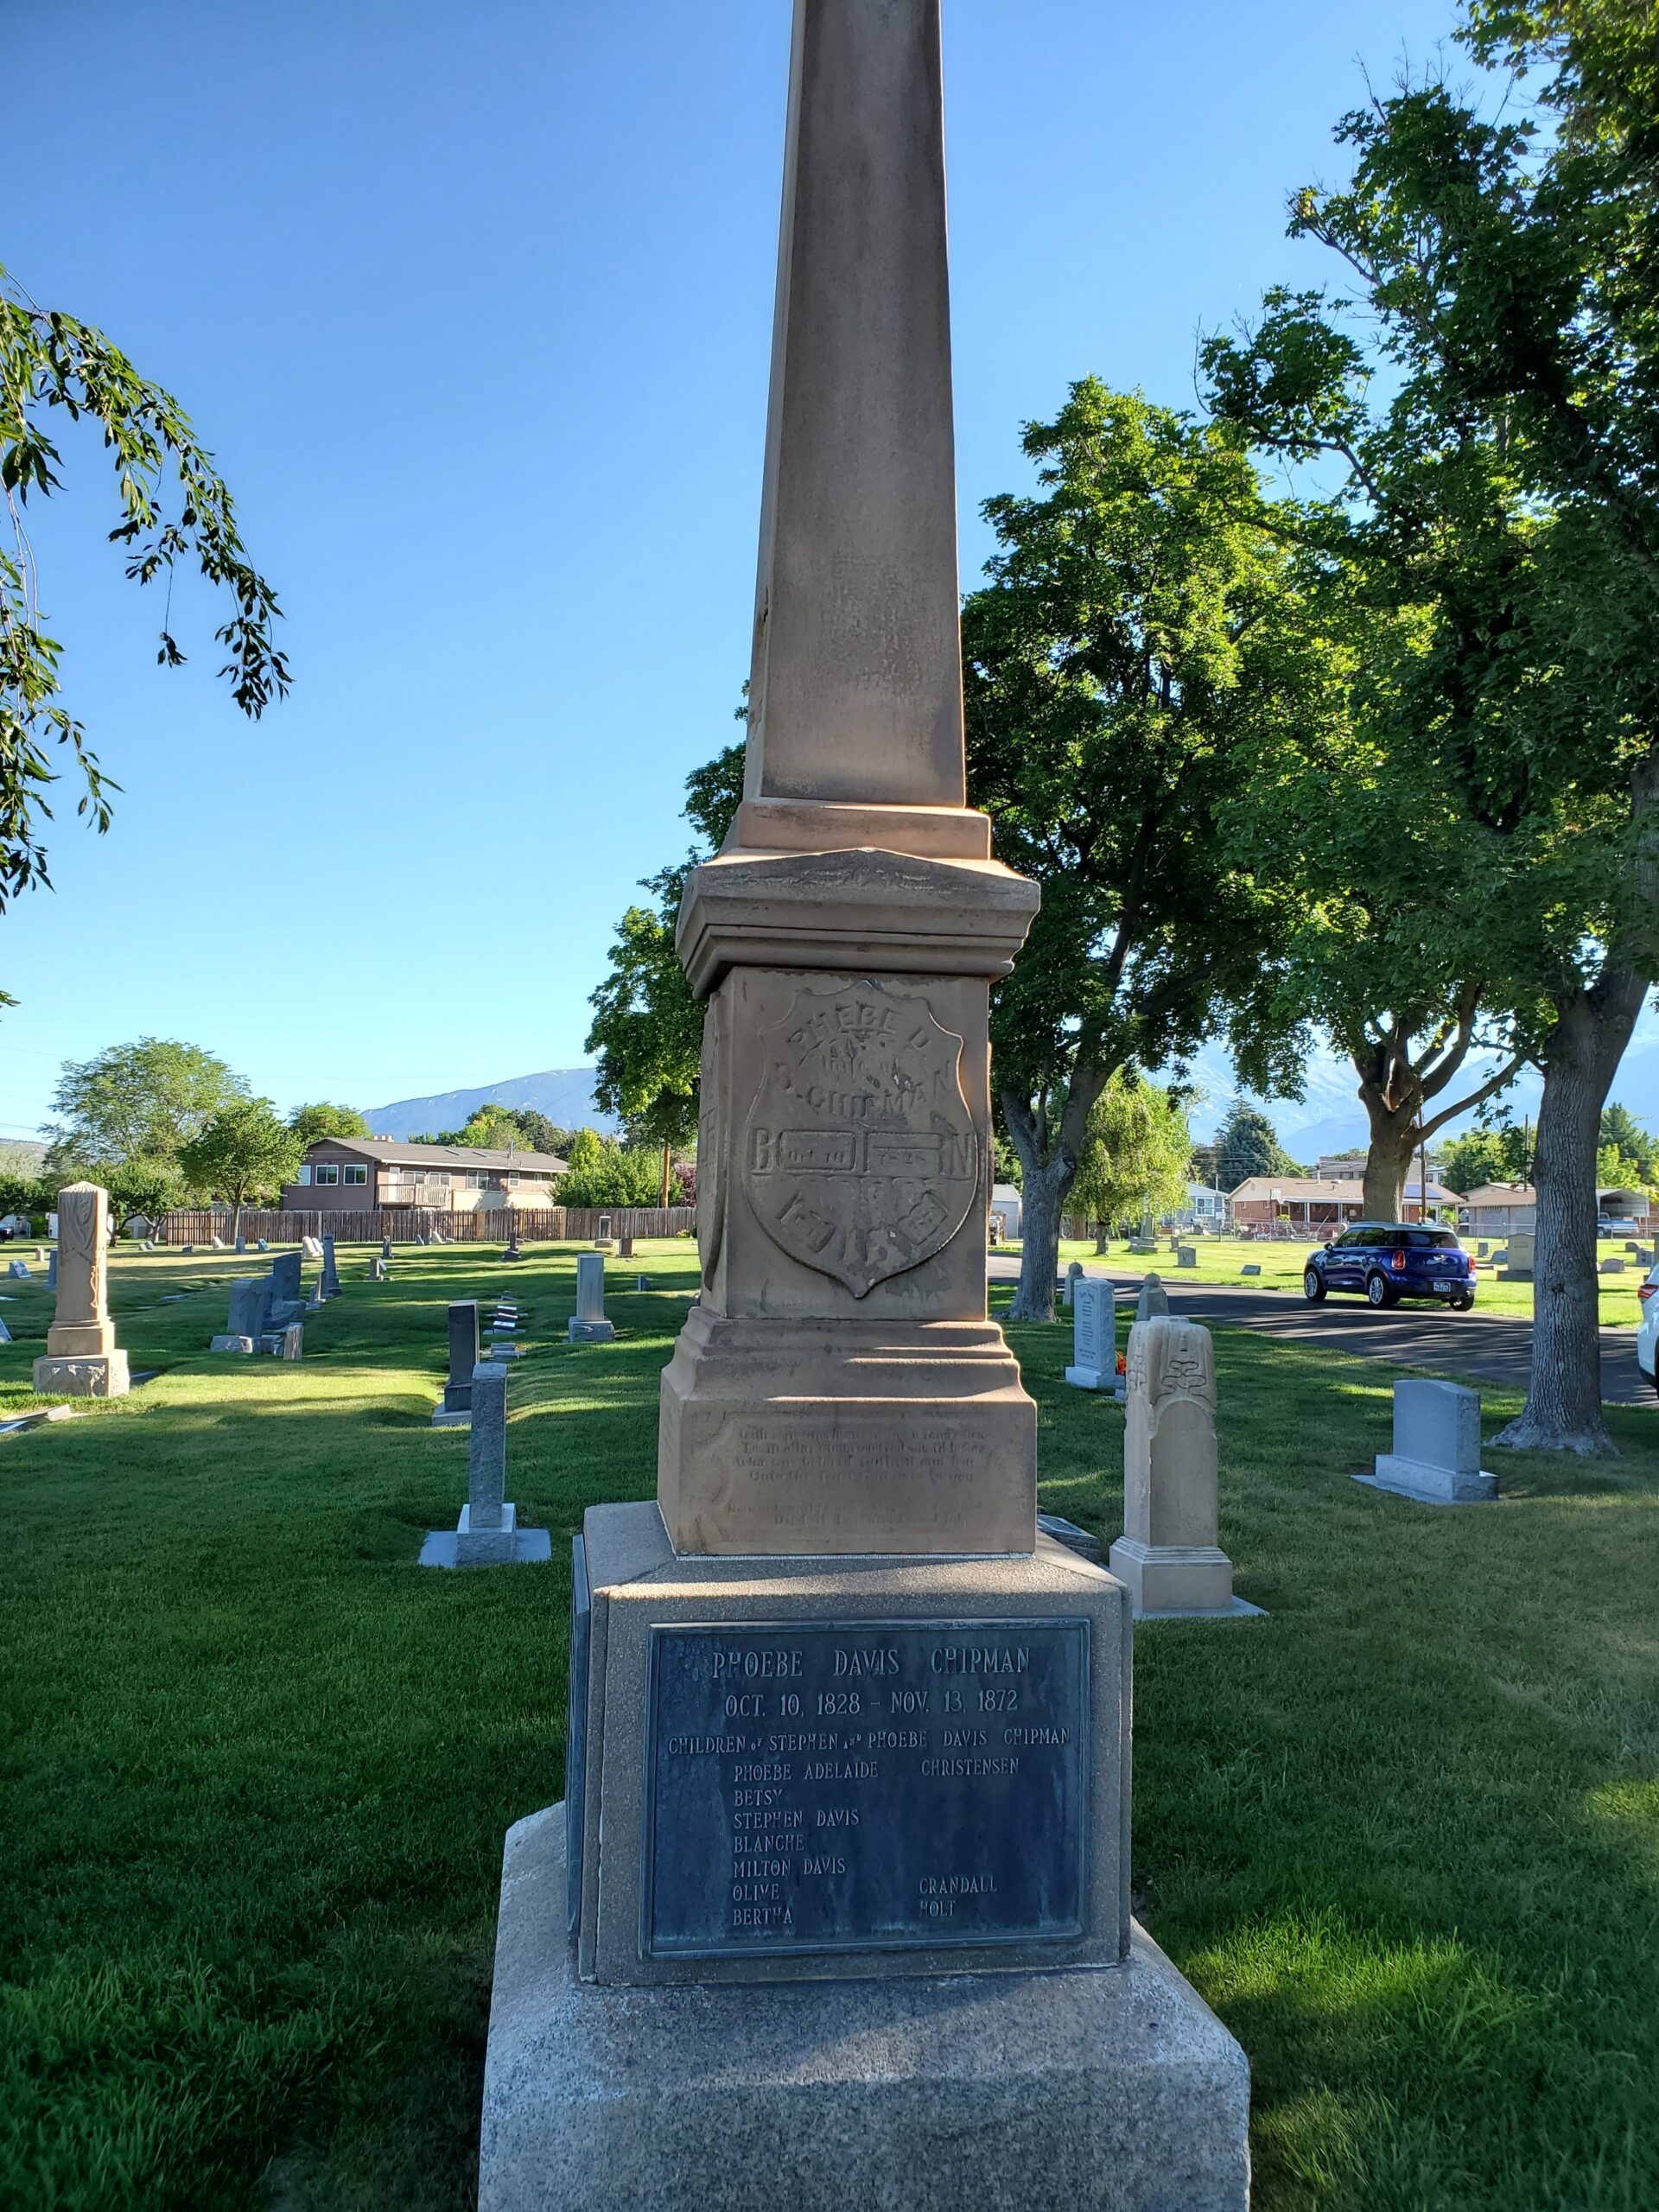 The third side of the Chipman Monument